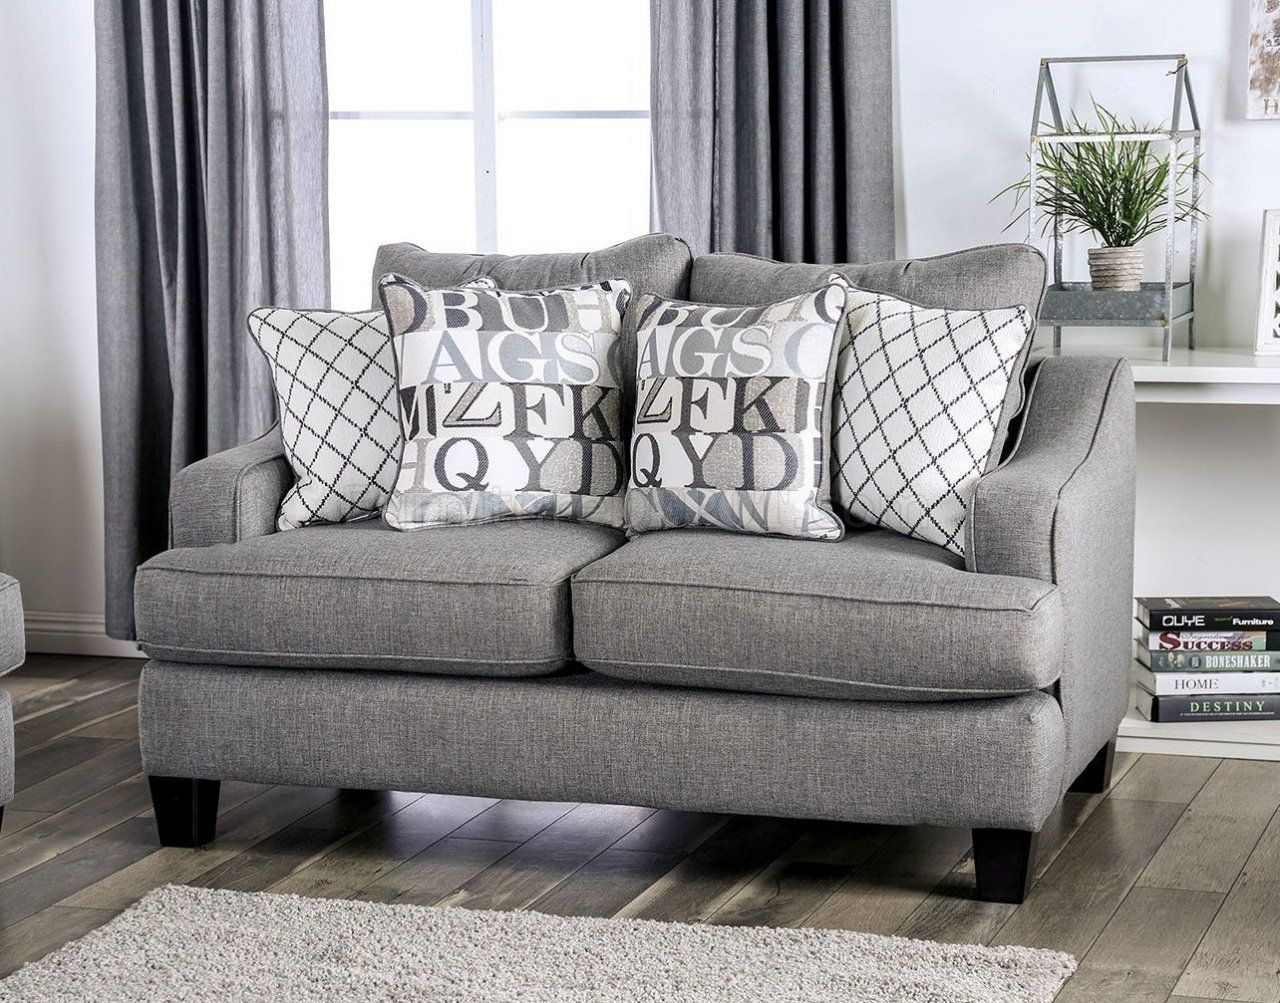 Verne Sofa Sm8330 In Bluish Gray Linen Like Fabric W/options With Sofas In Bluish Grey (View 7 of 20)